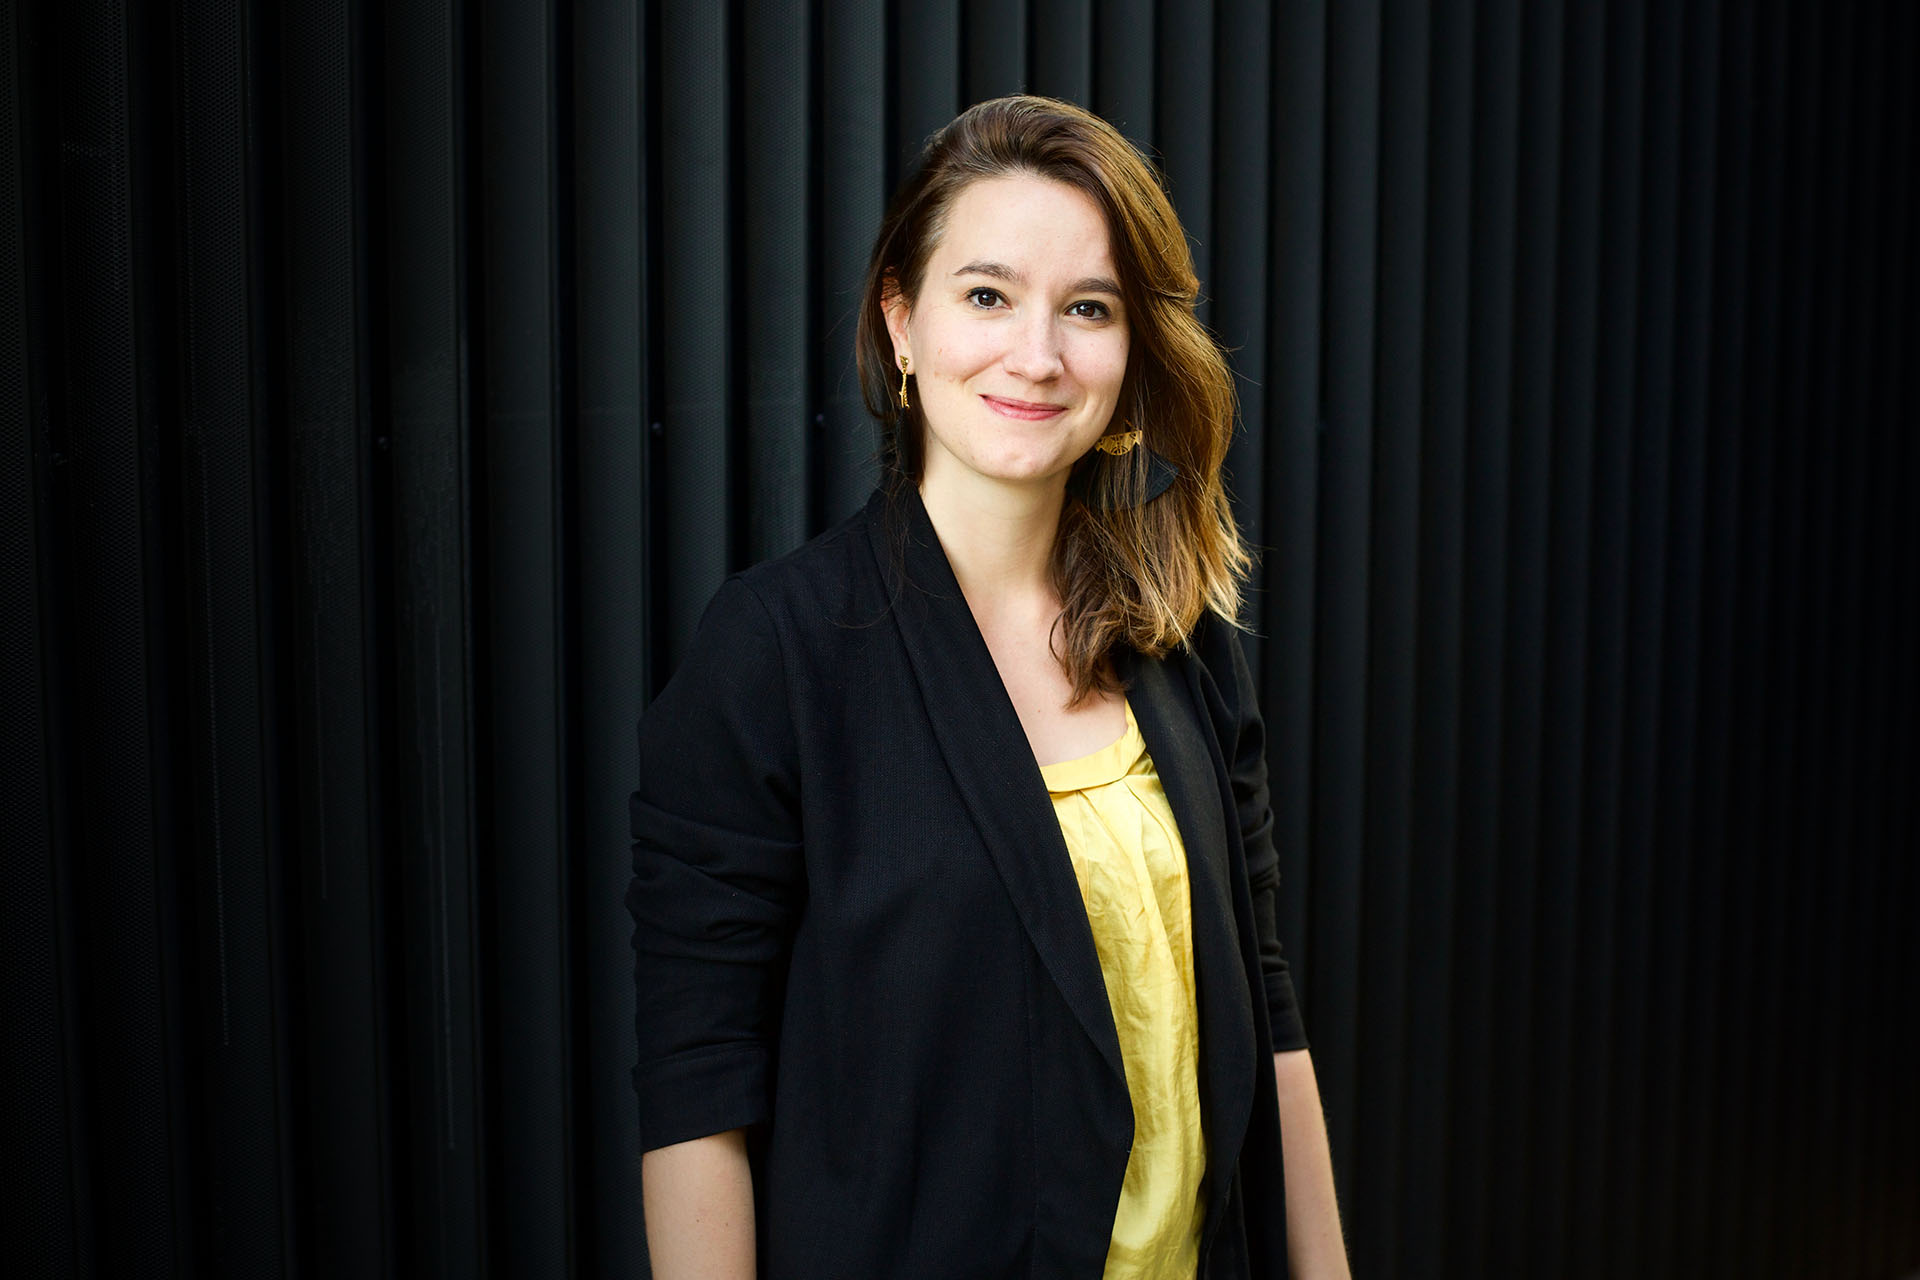 Mélanie Marcel is an engineer, neuroscientist and entrepreneur. In 2012, she decided to create SoScience, a company that promotes responsible research.